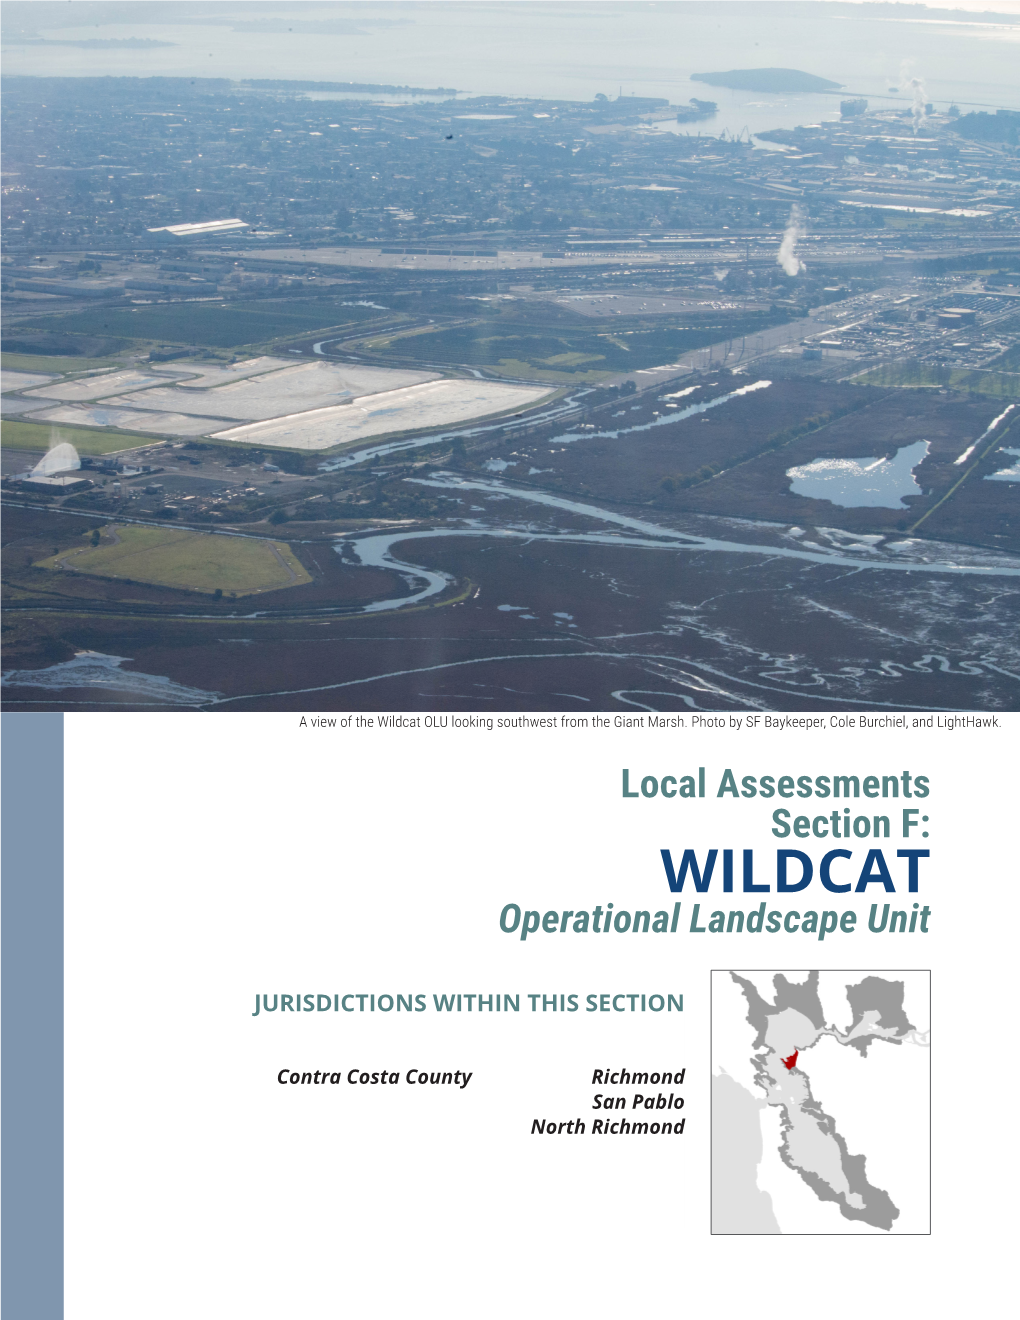 Local Assessments Section F: WILDCAT Operational Landscape Unit